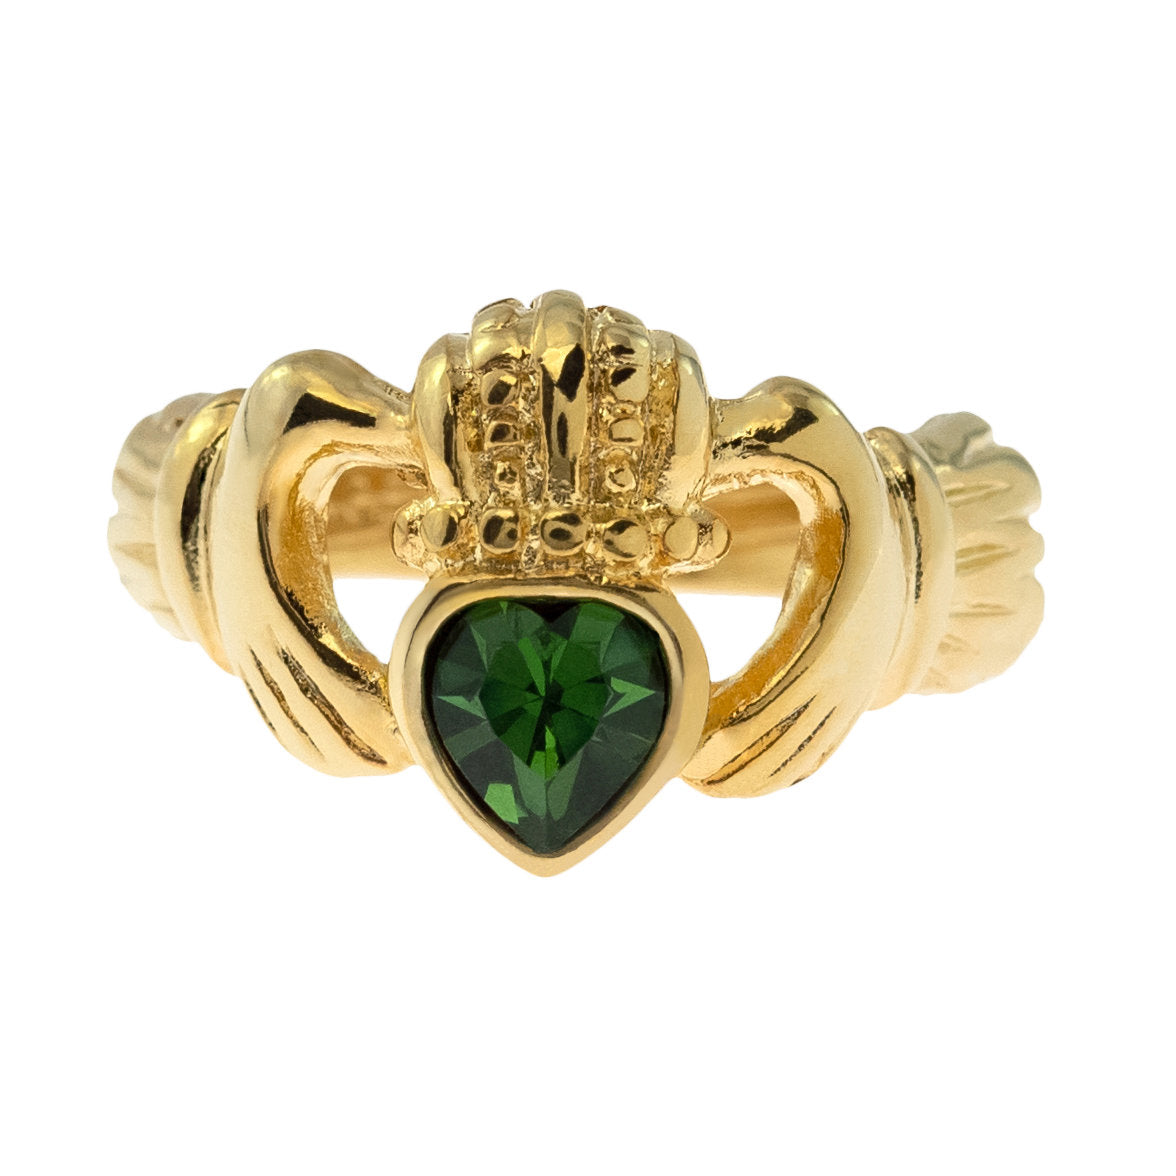 Vintage Jewelry Sapphire Austrian Crystal Claddagh Ring 18k Yellow Gold Electroplated by PVD Vintage Jewelry